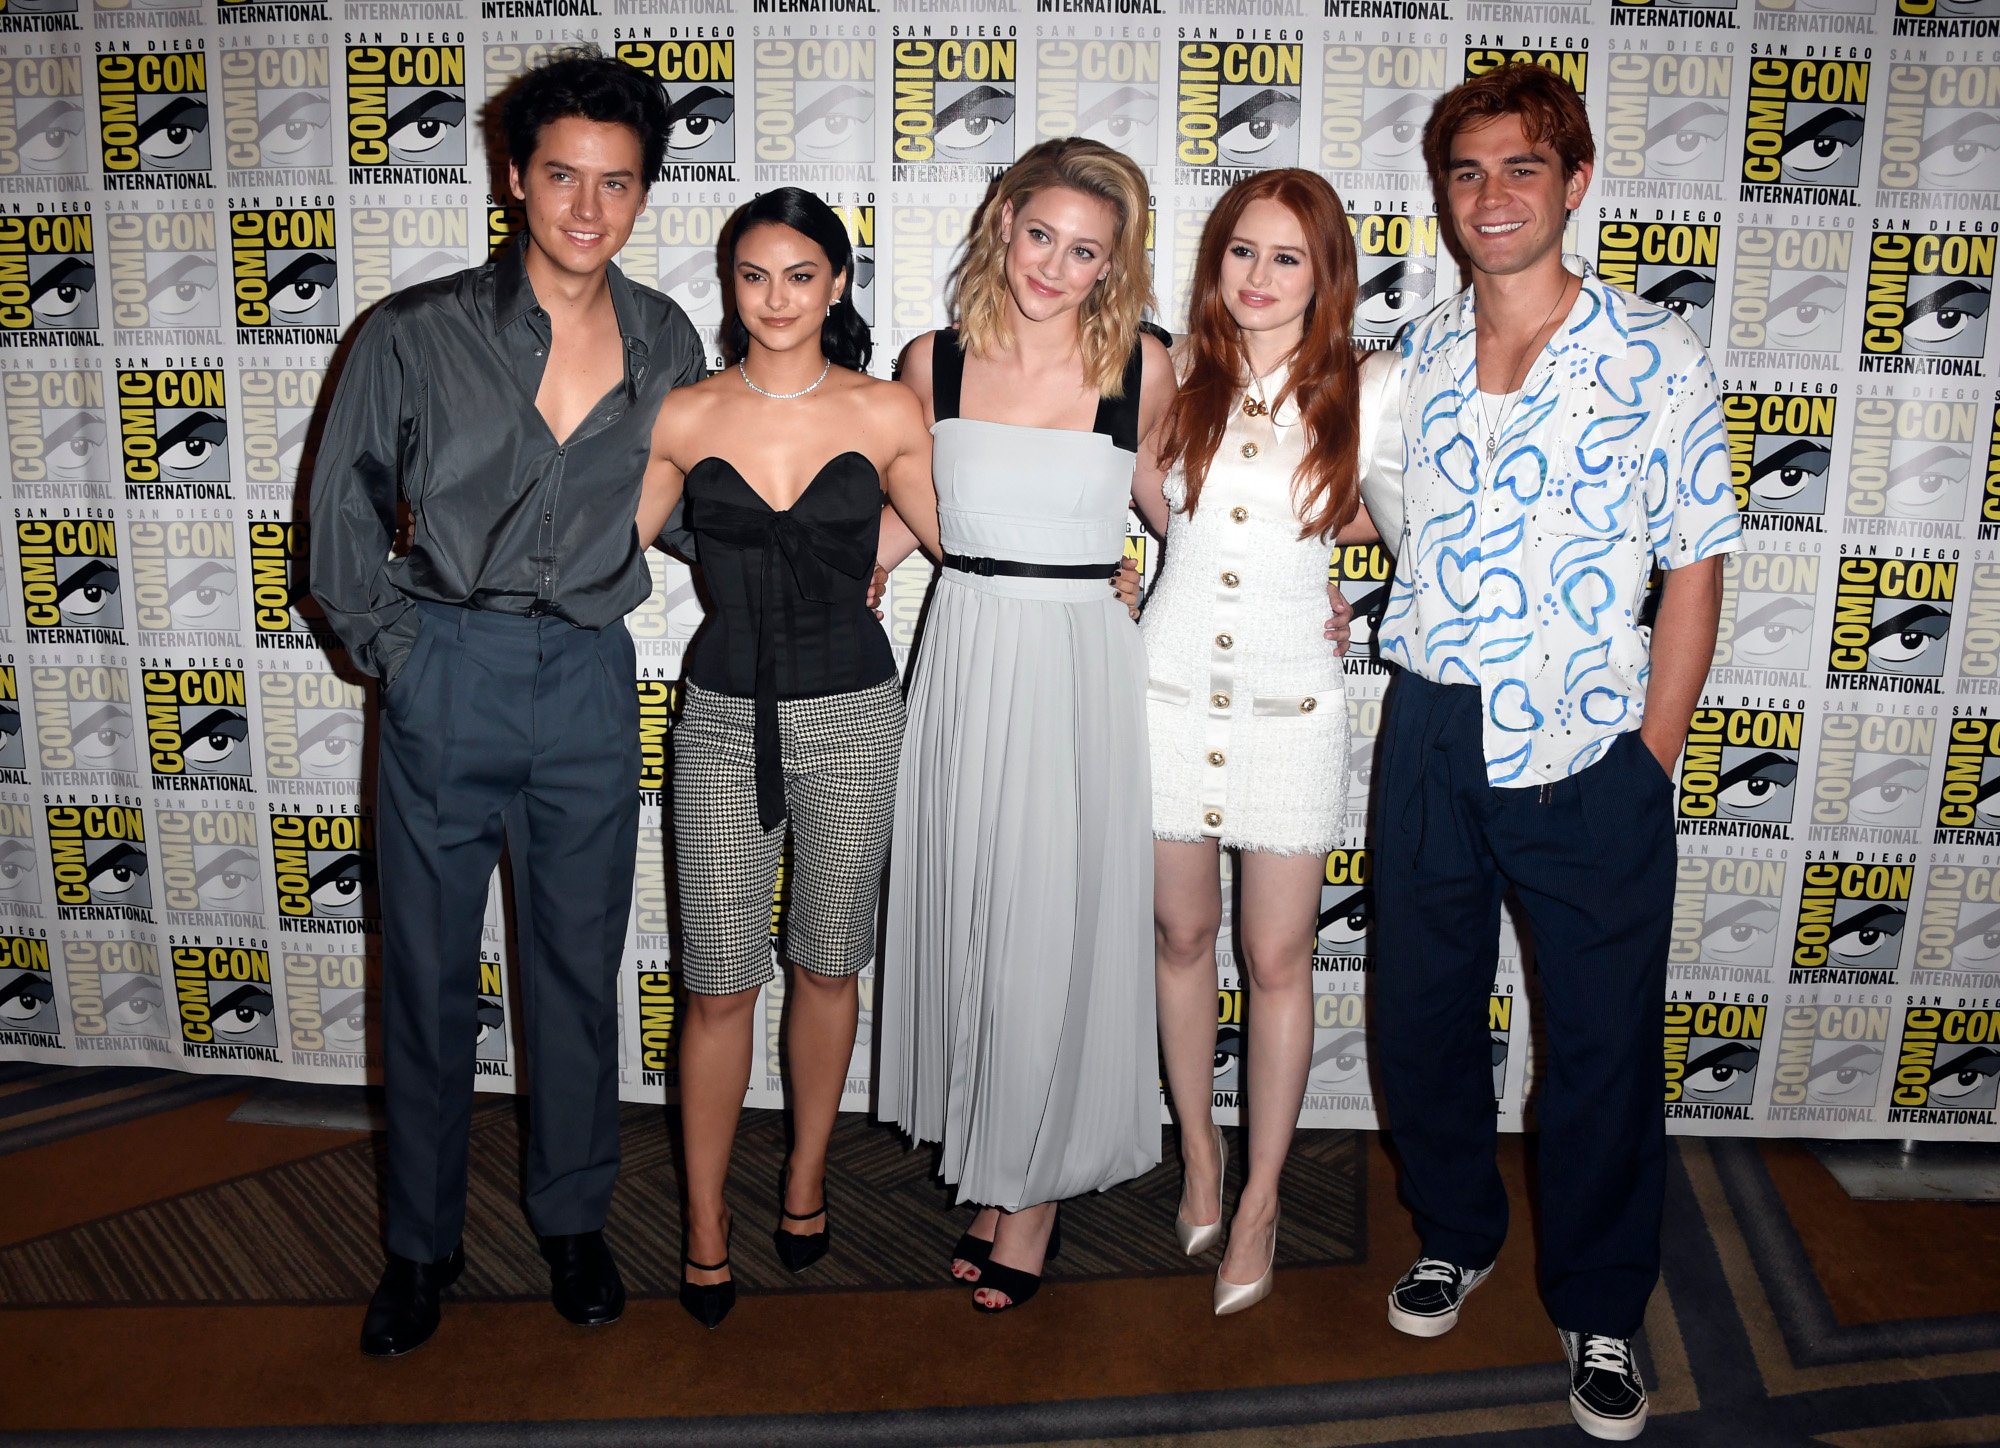 'Riverdale' stars Cole Sprouse, Camila Mendes, Lili Reinhart, Madelaine Petsch, and K.J. Apa. They're standing side by side in front of a Comic-Con wall and wearing clothes that mix casual and formal styles.